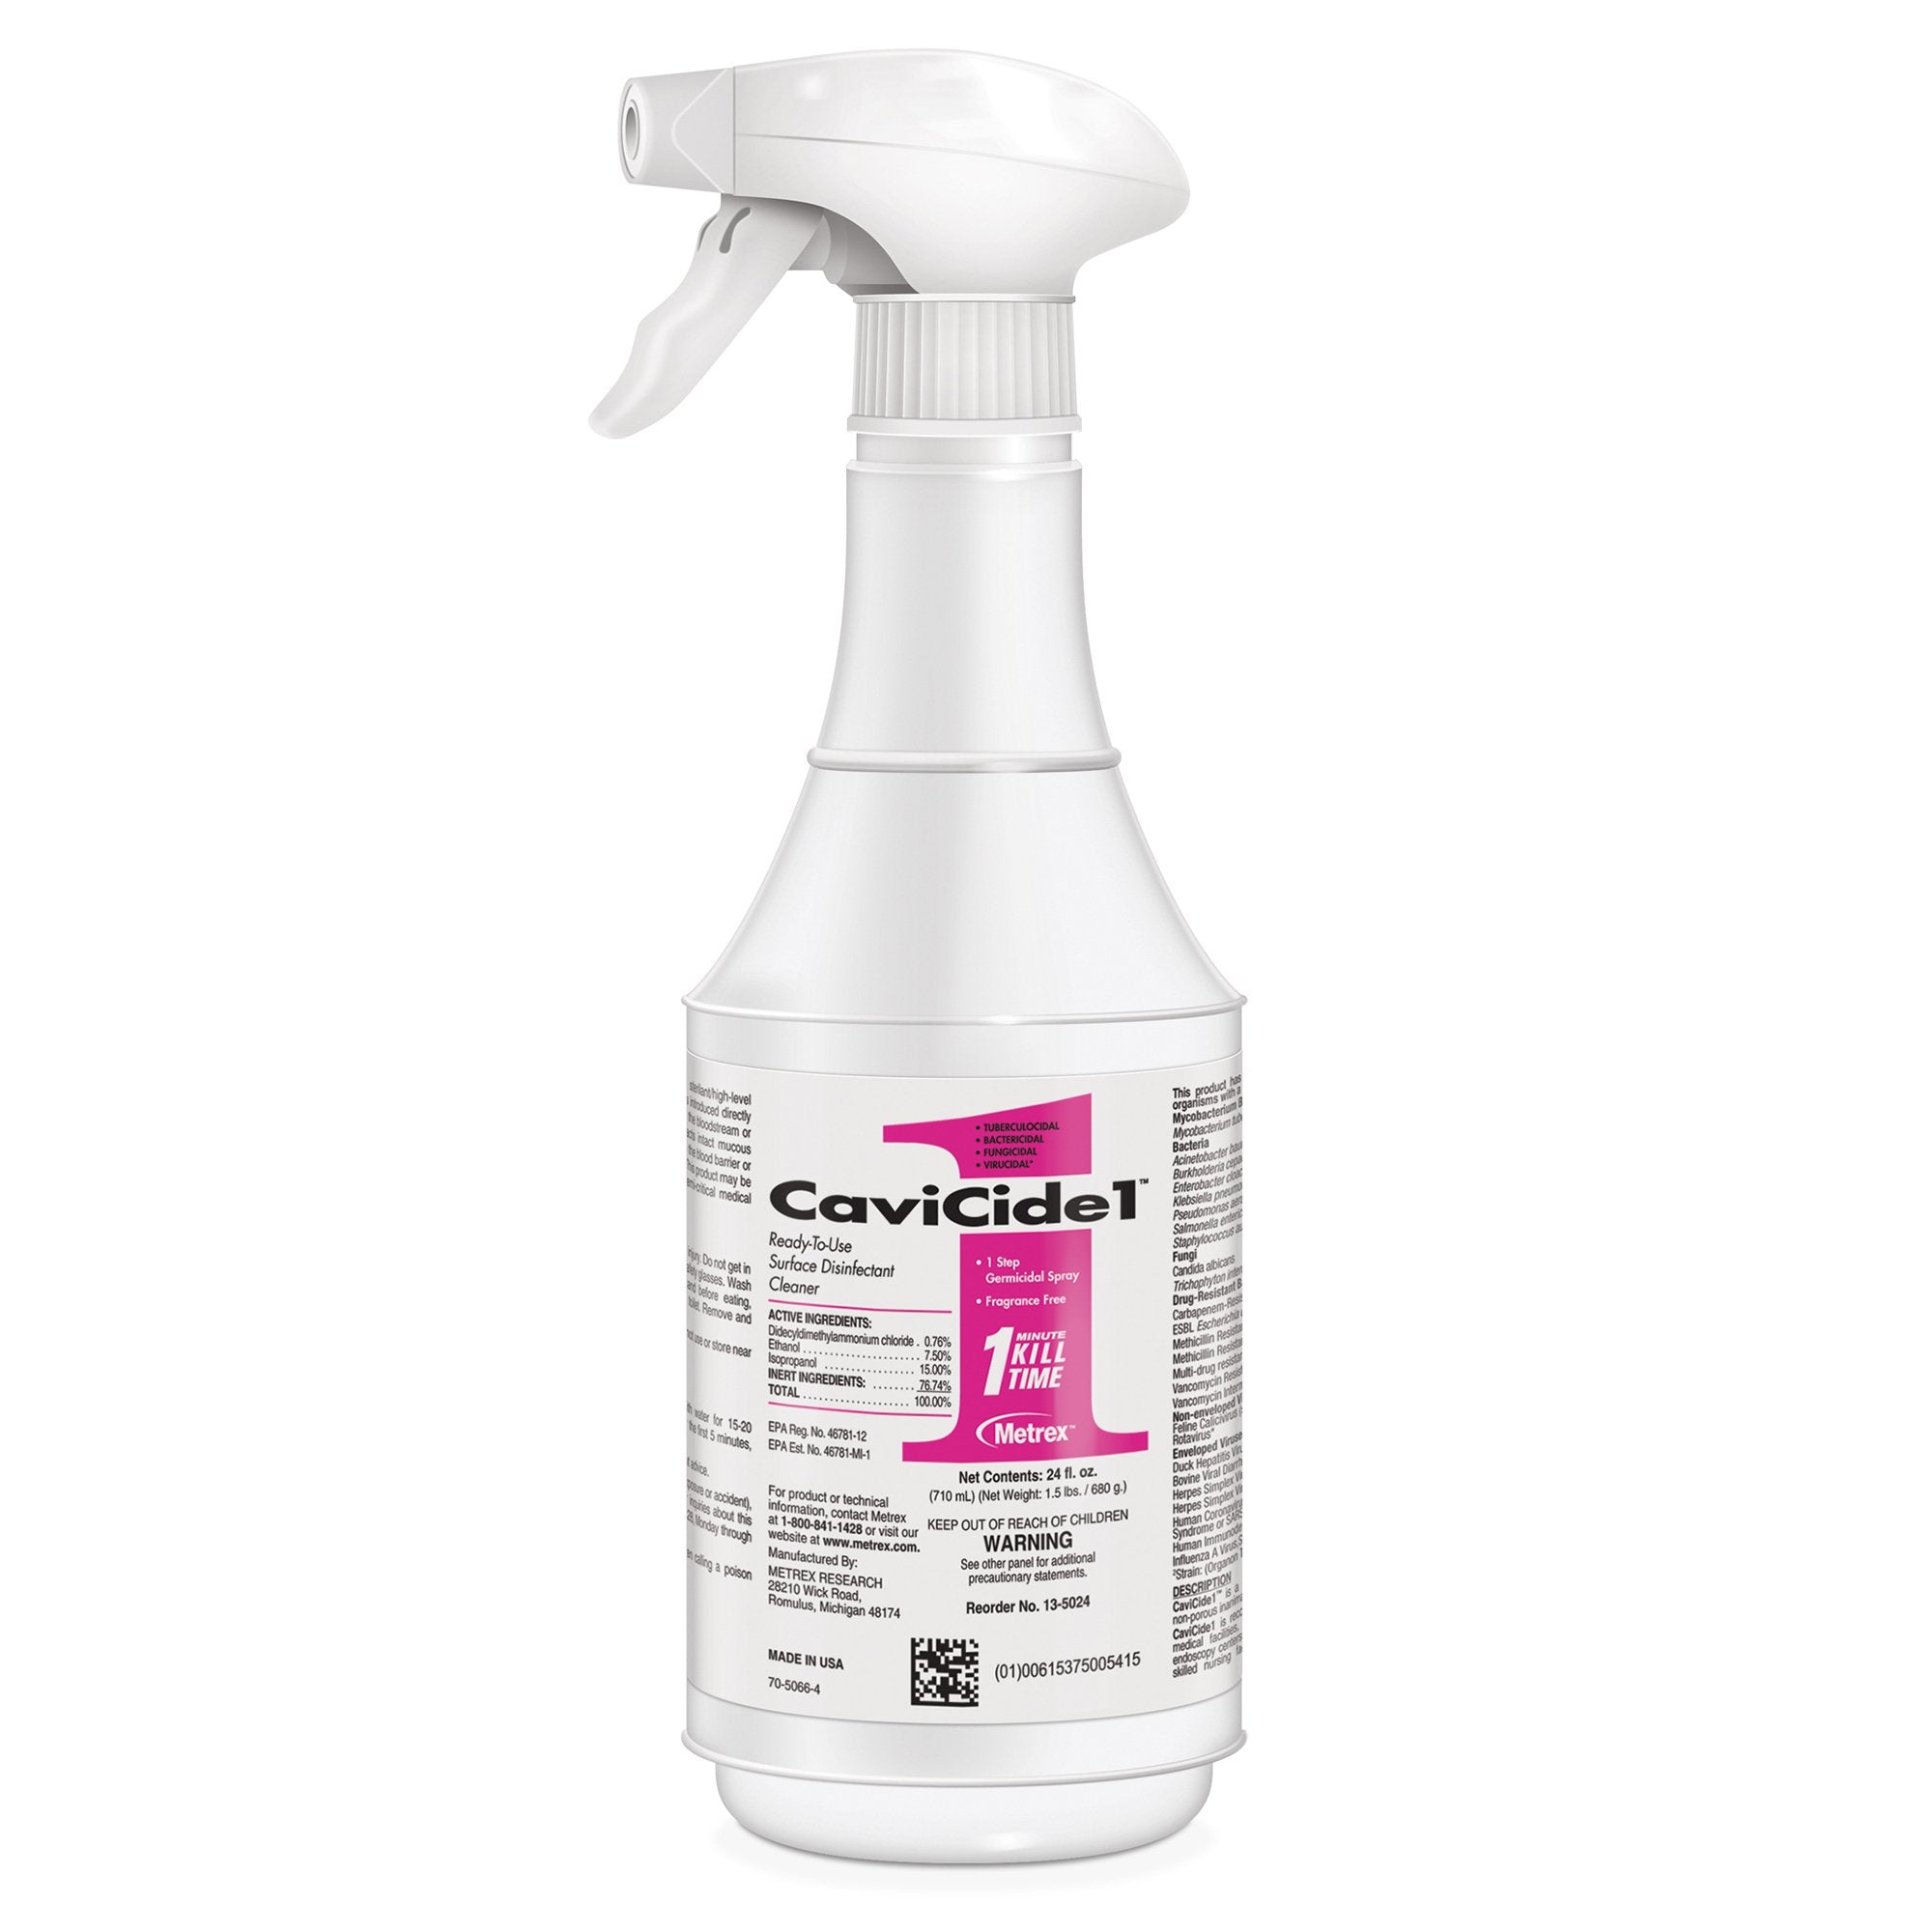 CaviCide1™ Surface Disinfectant Cleaner Alcohol Based Pump Spray Liquid 24 oz. Bottle Alcohol Scent NonSterile